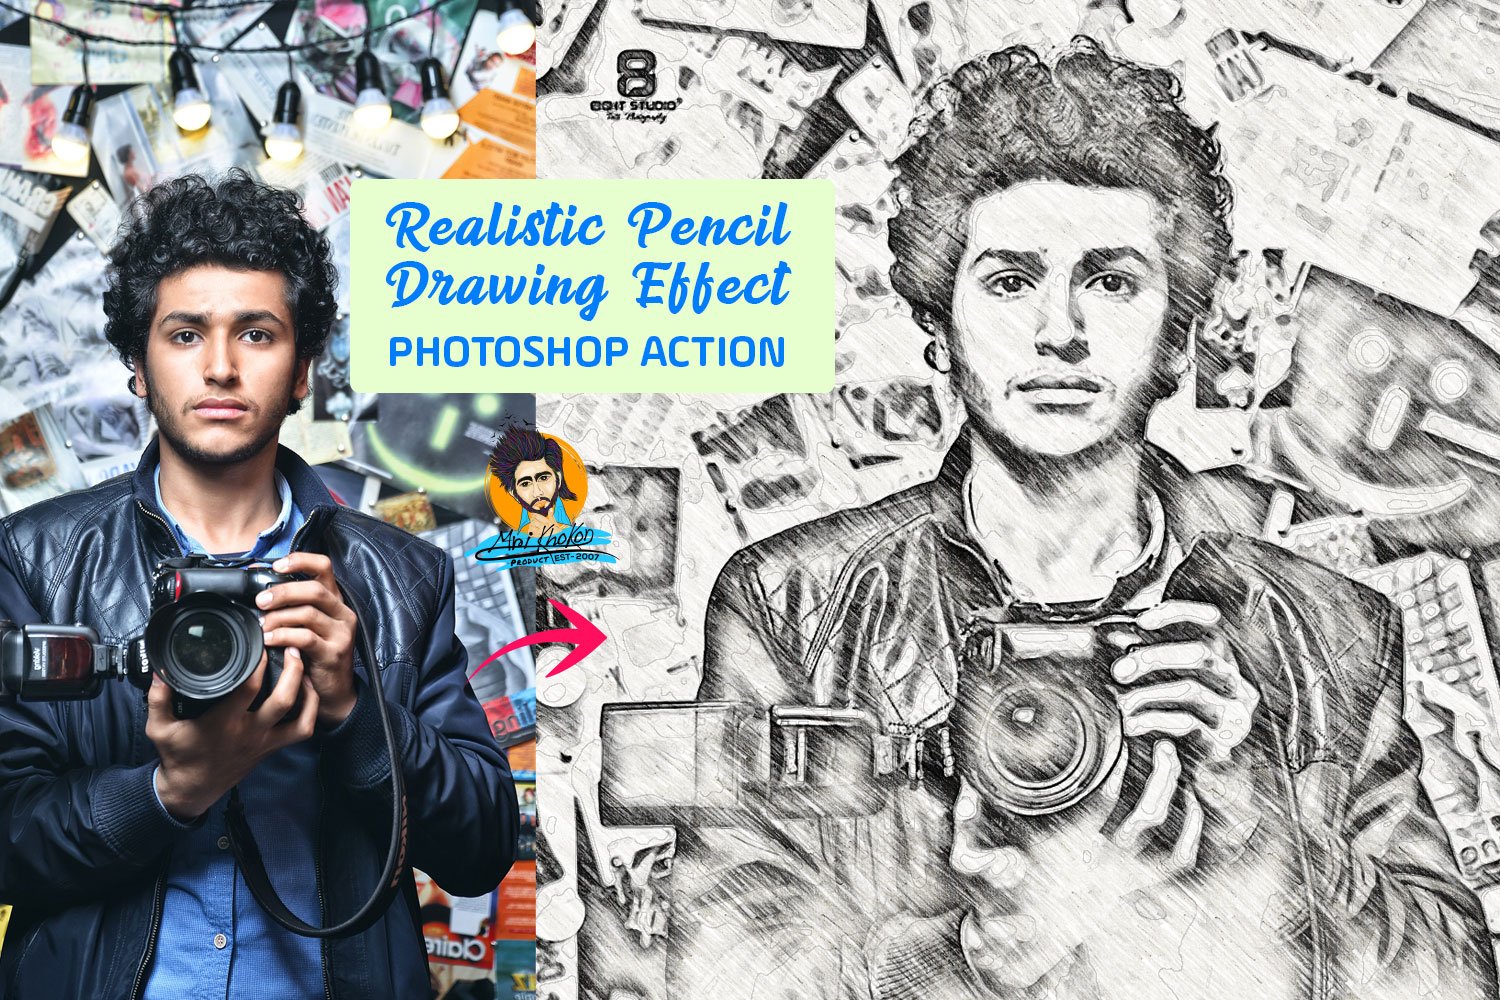 Realistic Pencil Drawing Effectcover image.